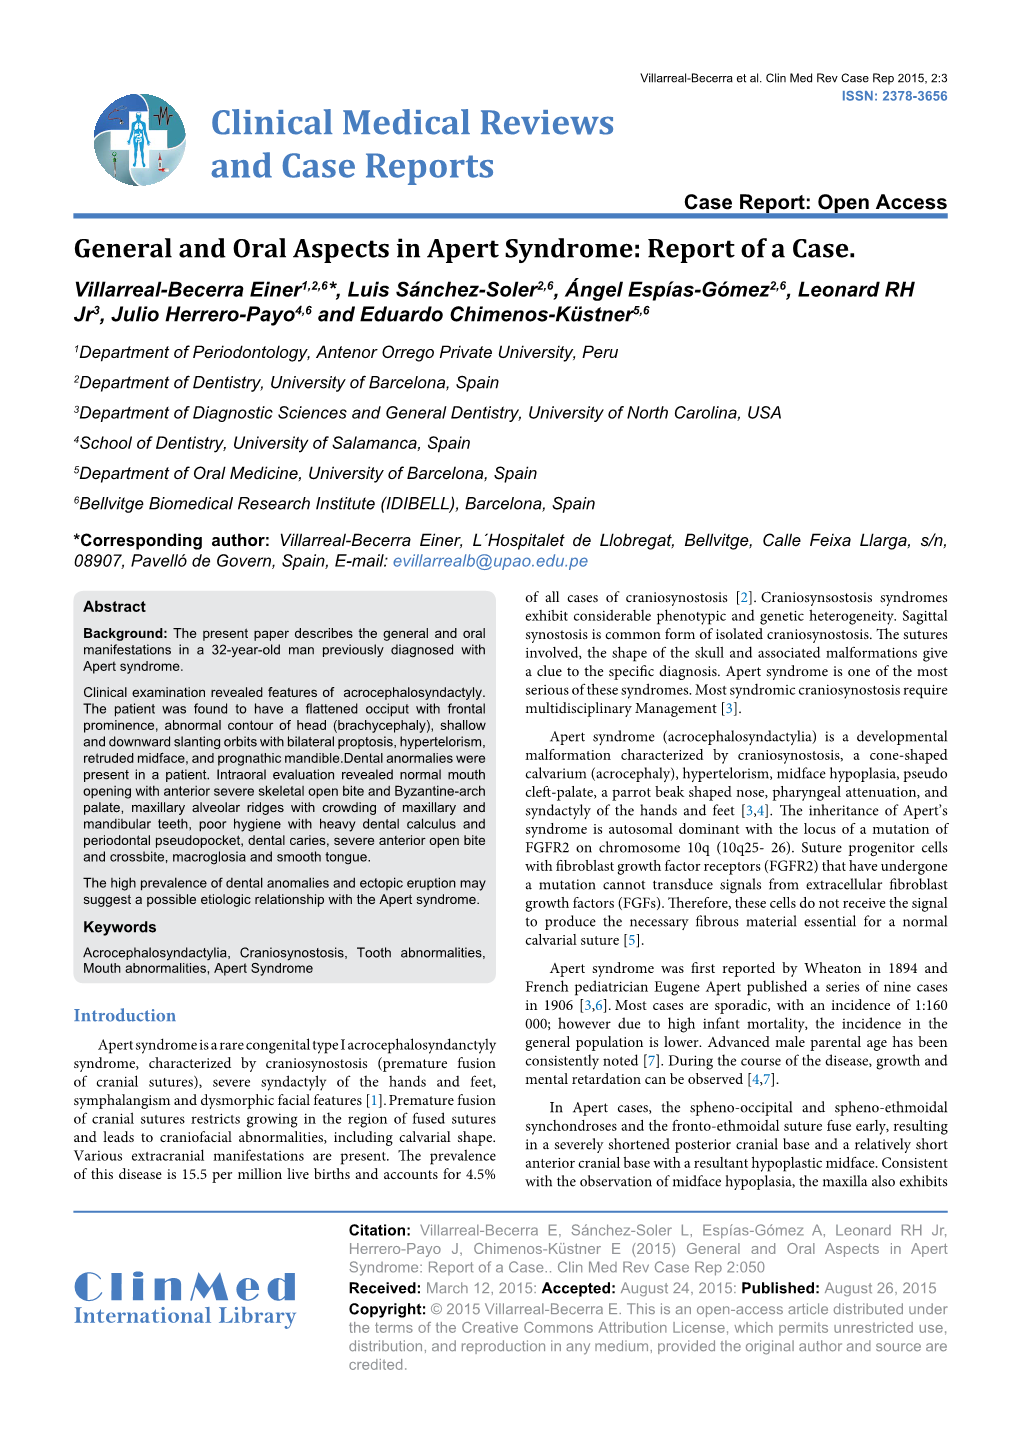 General and Oral Aspects in Apert Syndrome: Report of a Case